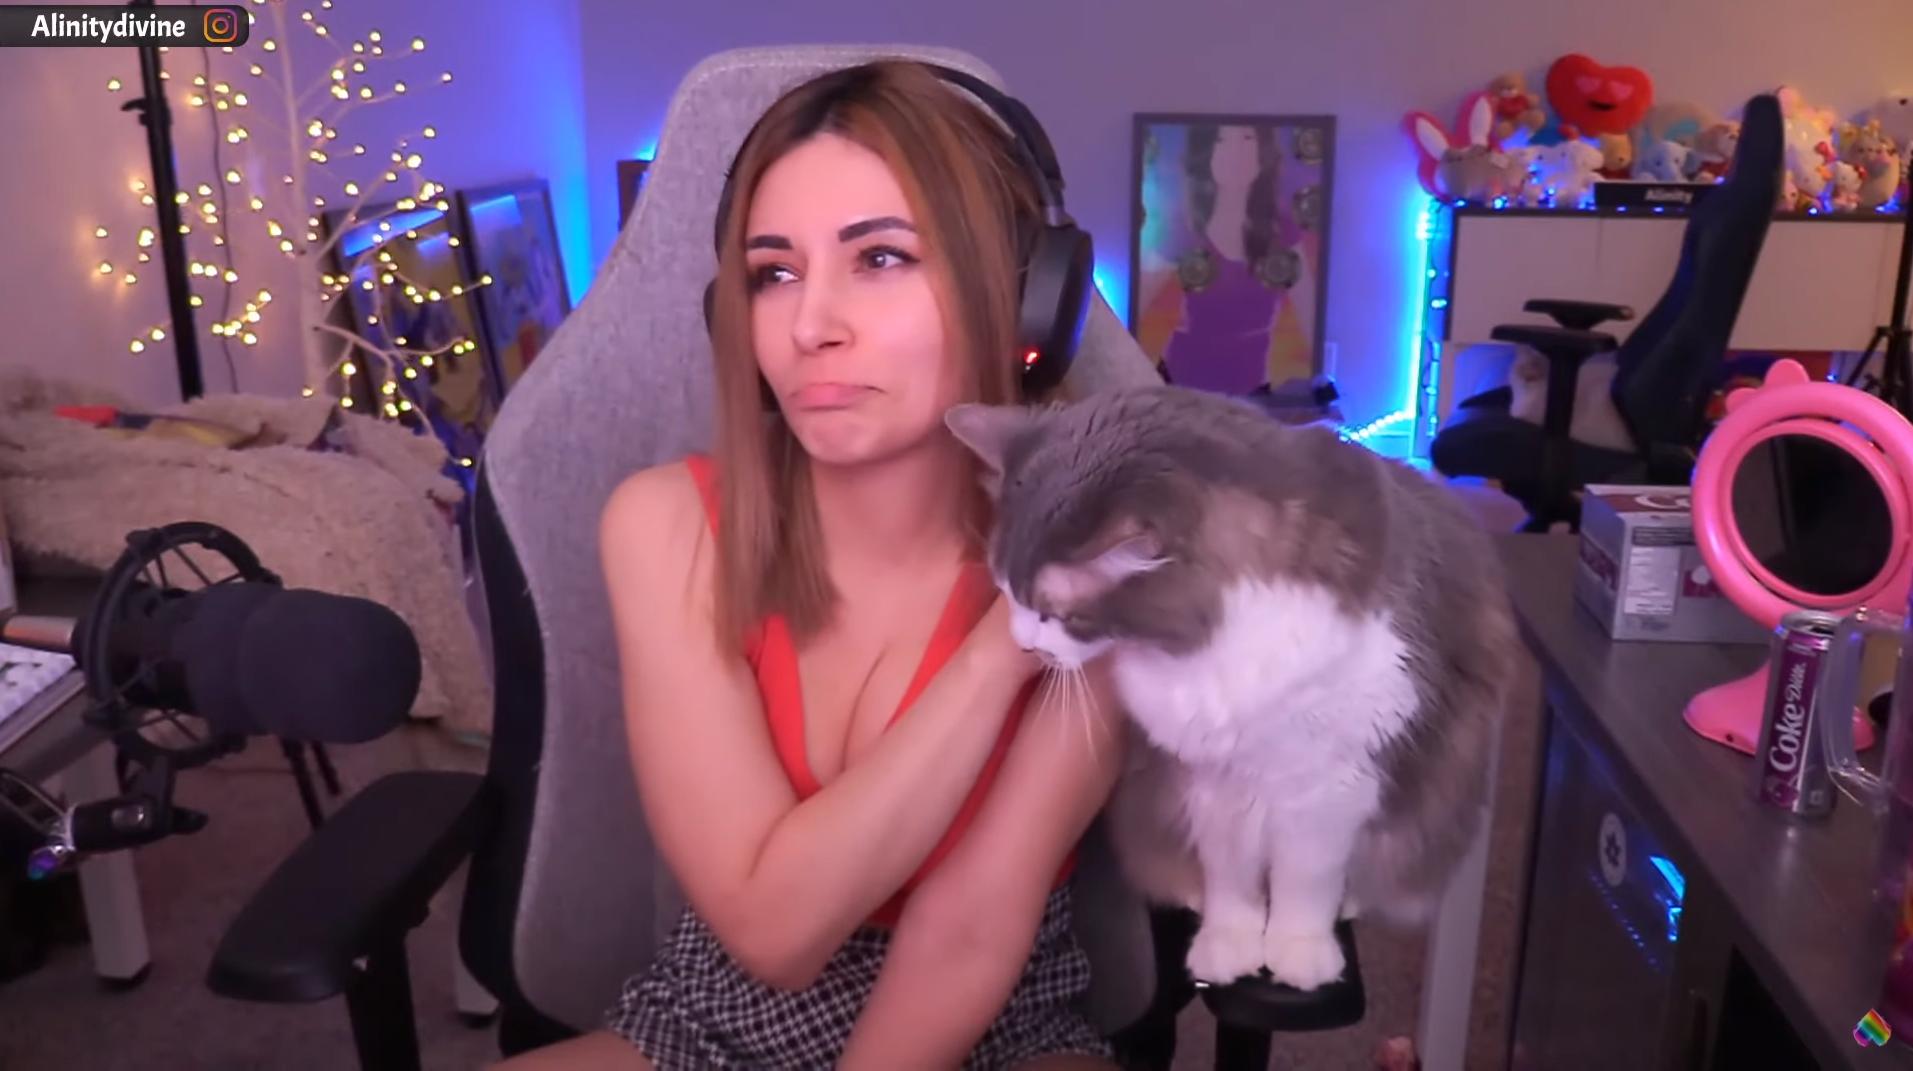 Alinity has dubbed claims Twitch shows her special favoritism 